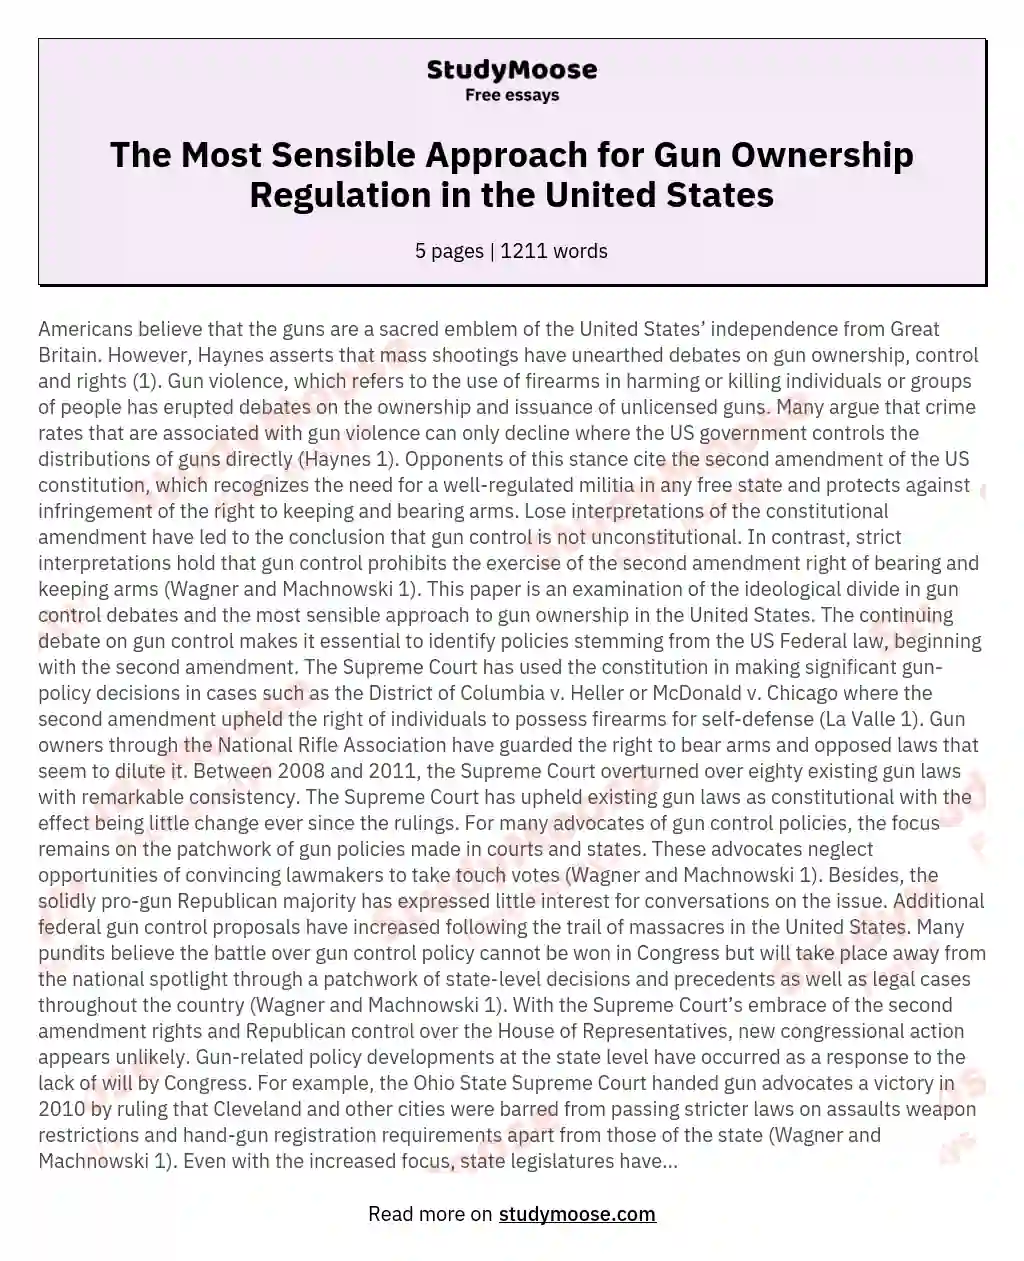 The Most Sensible Approach for Gun Ownership Regulation in the United States essay